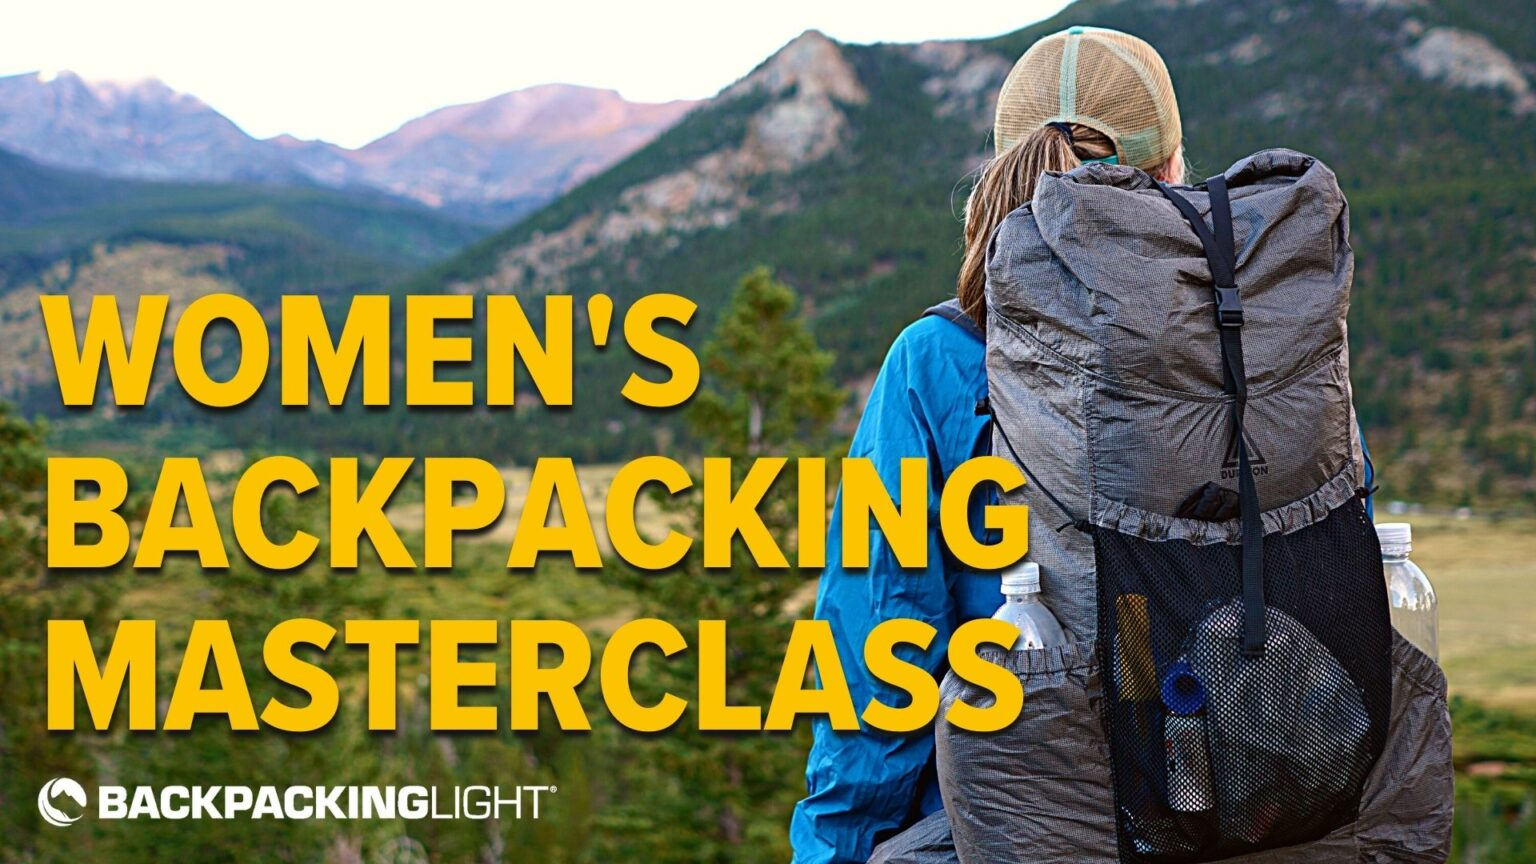 Not Just For Turkey - Backpacking Light